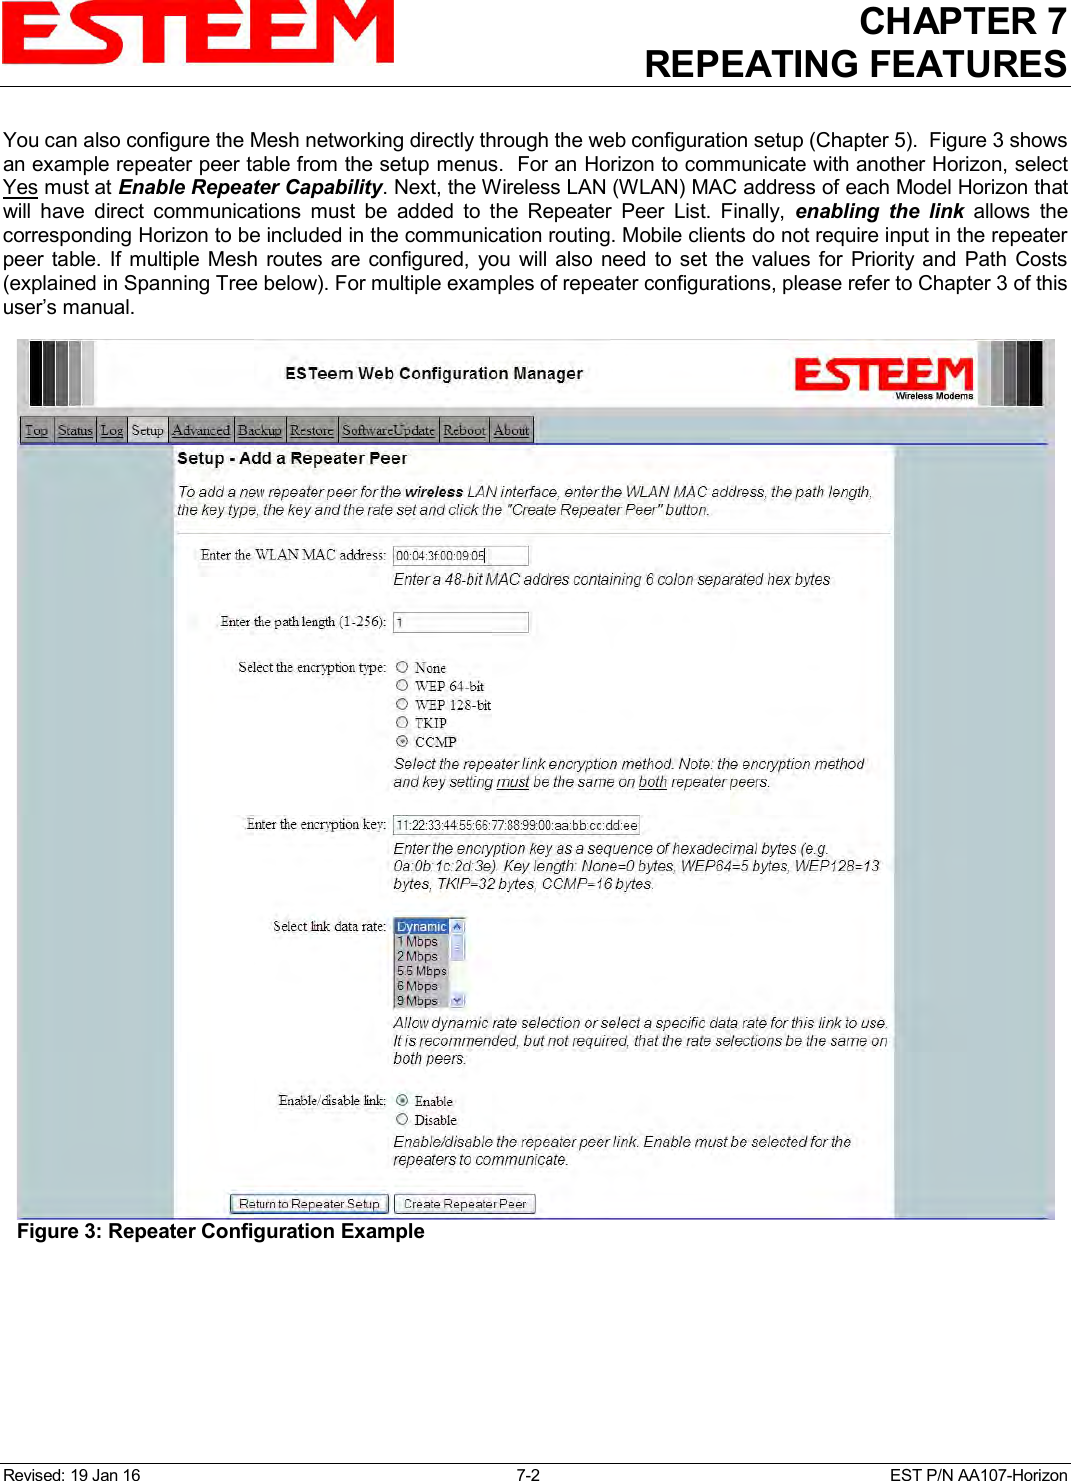 CHAPTER 7 REPEATING FEATURES   Revised: 19 Jan 16  7-2  EST P/N AA107-Horizon You can also configure the Mesh networking directly through the web configuration setup (Chapter 5).  Figure 3 shows an example repeater peer table from the setup menus.  For an Horizon to communicate with another Horizon, select Yes must at Enable Repeater Capability. Next, the Wireless LAN (WLAN) MAC address of each Model Horizon that will  have  direct  communications  must  be  added  to  the  Repeater  Peer  List.  Finally,  enabling  the  link  allows  the corresponding Horizon to be included in the communication routing. Mobile clients do not require input in the repeater peer table. If multiple  Mesh routes  are configured,  you will also  need to set  the  values  for Priority and  Path  Costs (explained in Spanning Tree below). For multiple examples of repeater configurations, please refer to Chapter 3 of this user’s manual.    Figure 3: Repeater Configuration Example 